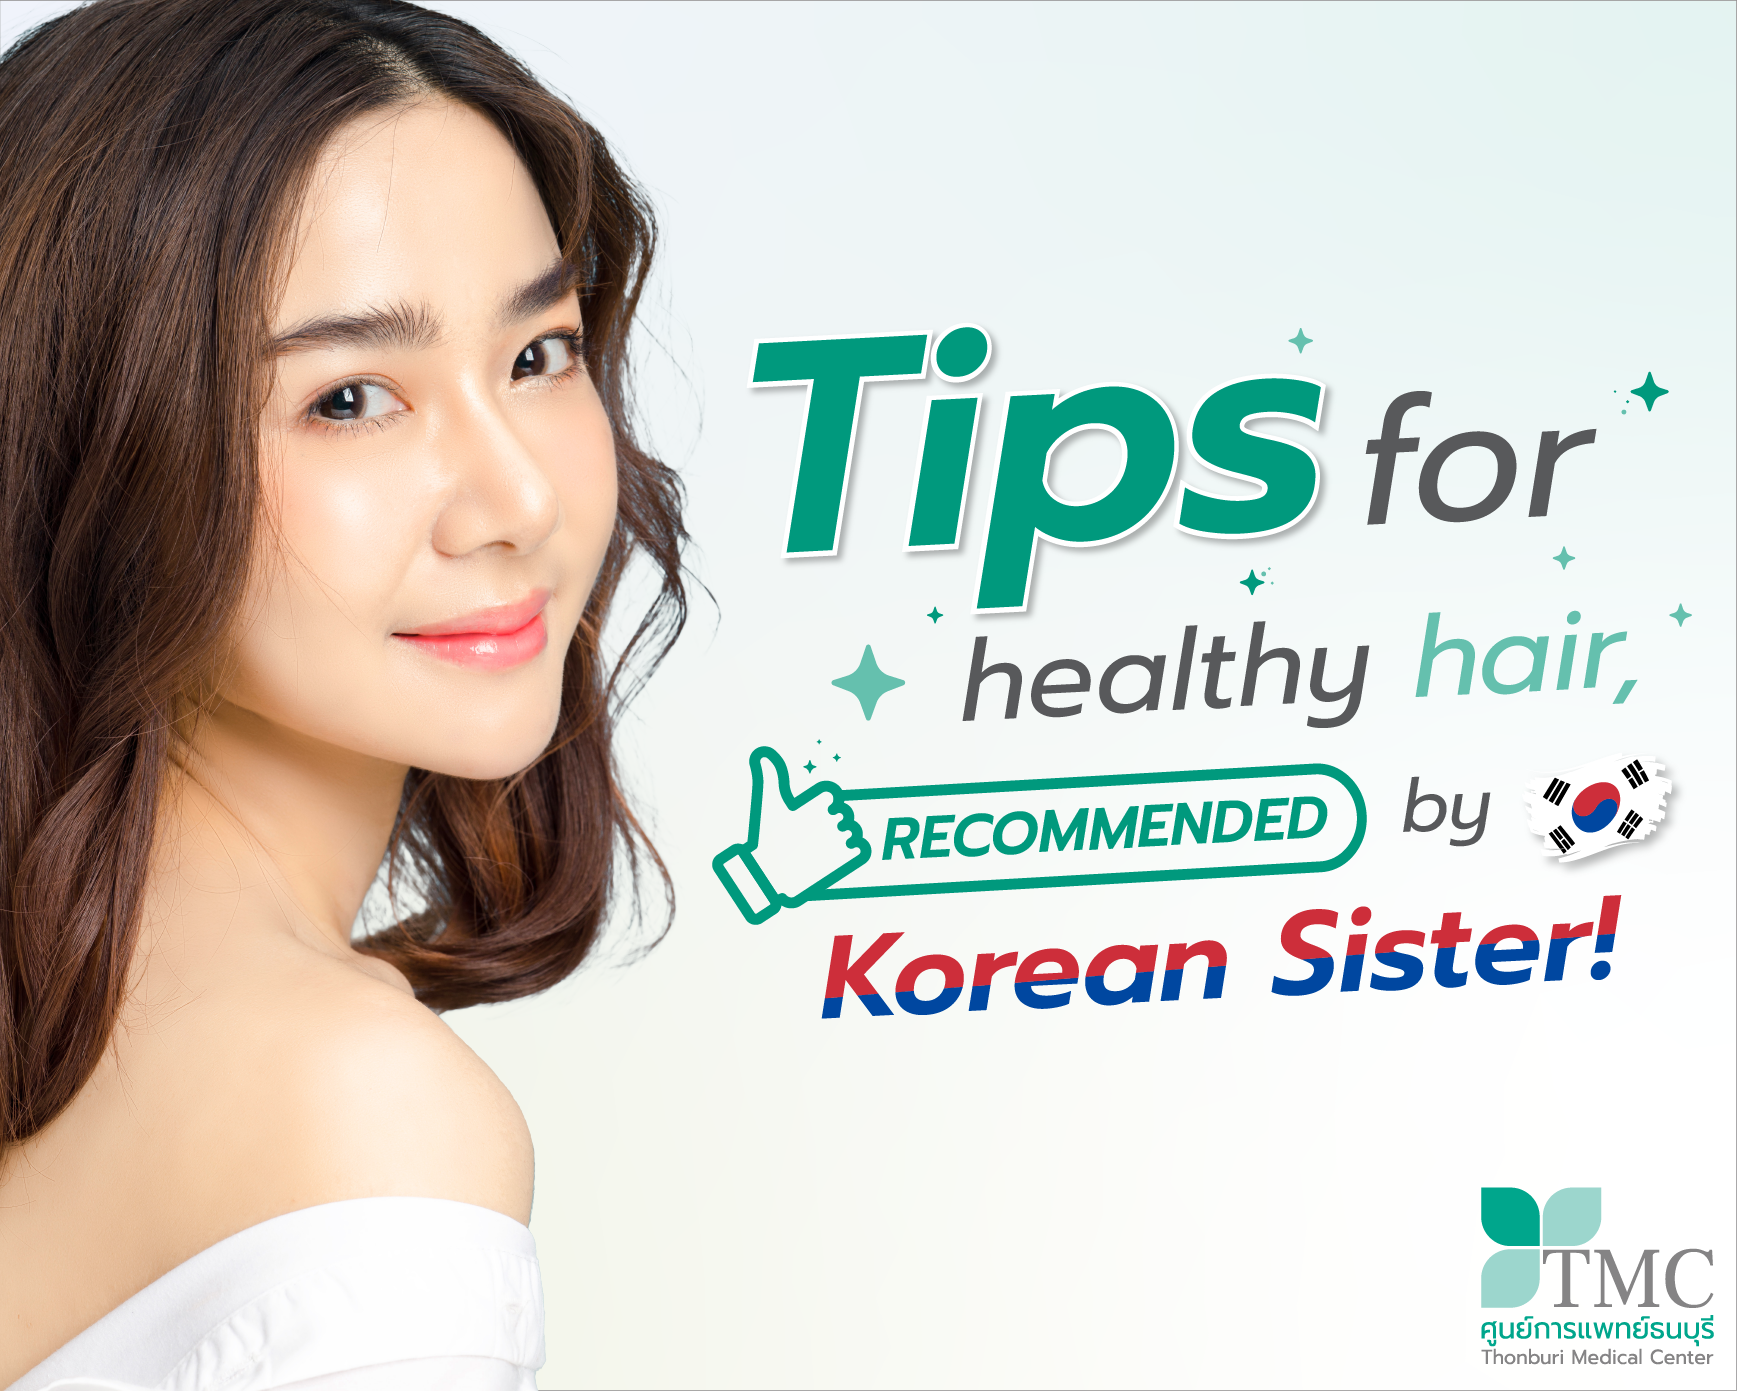 Tips for healthy hair, recommended by Korean Sister!